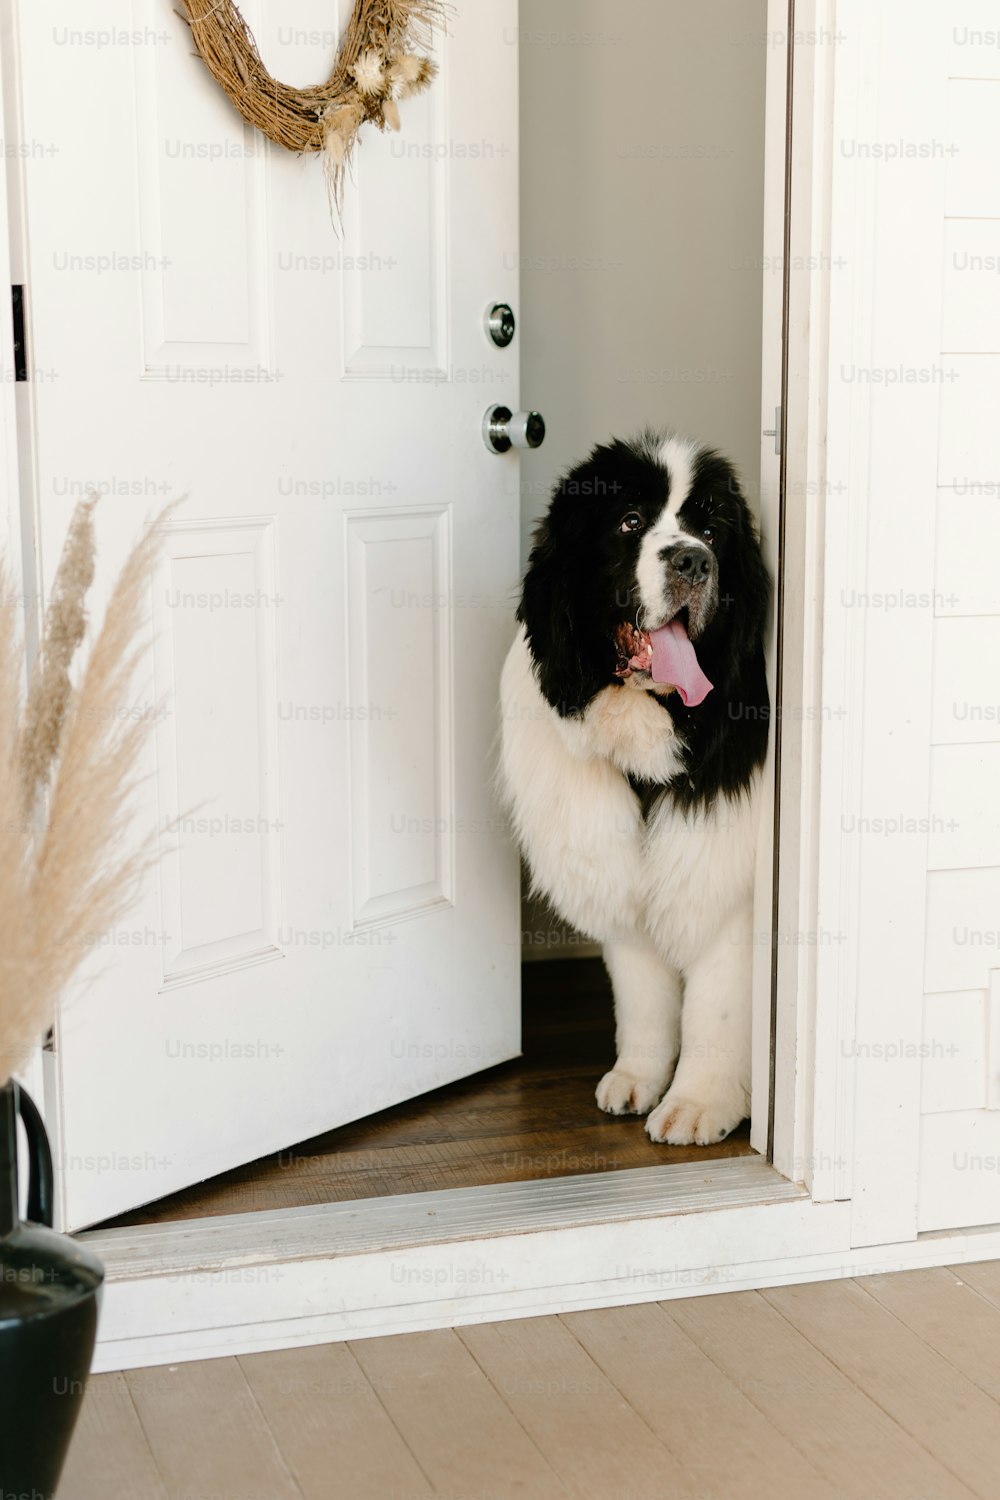 a black and white dog standing in front of a door